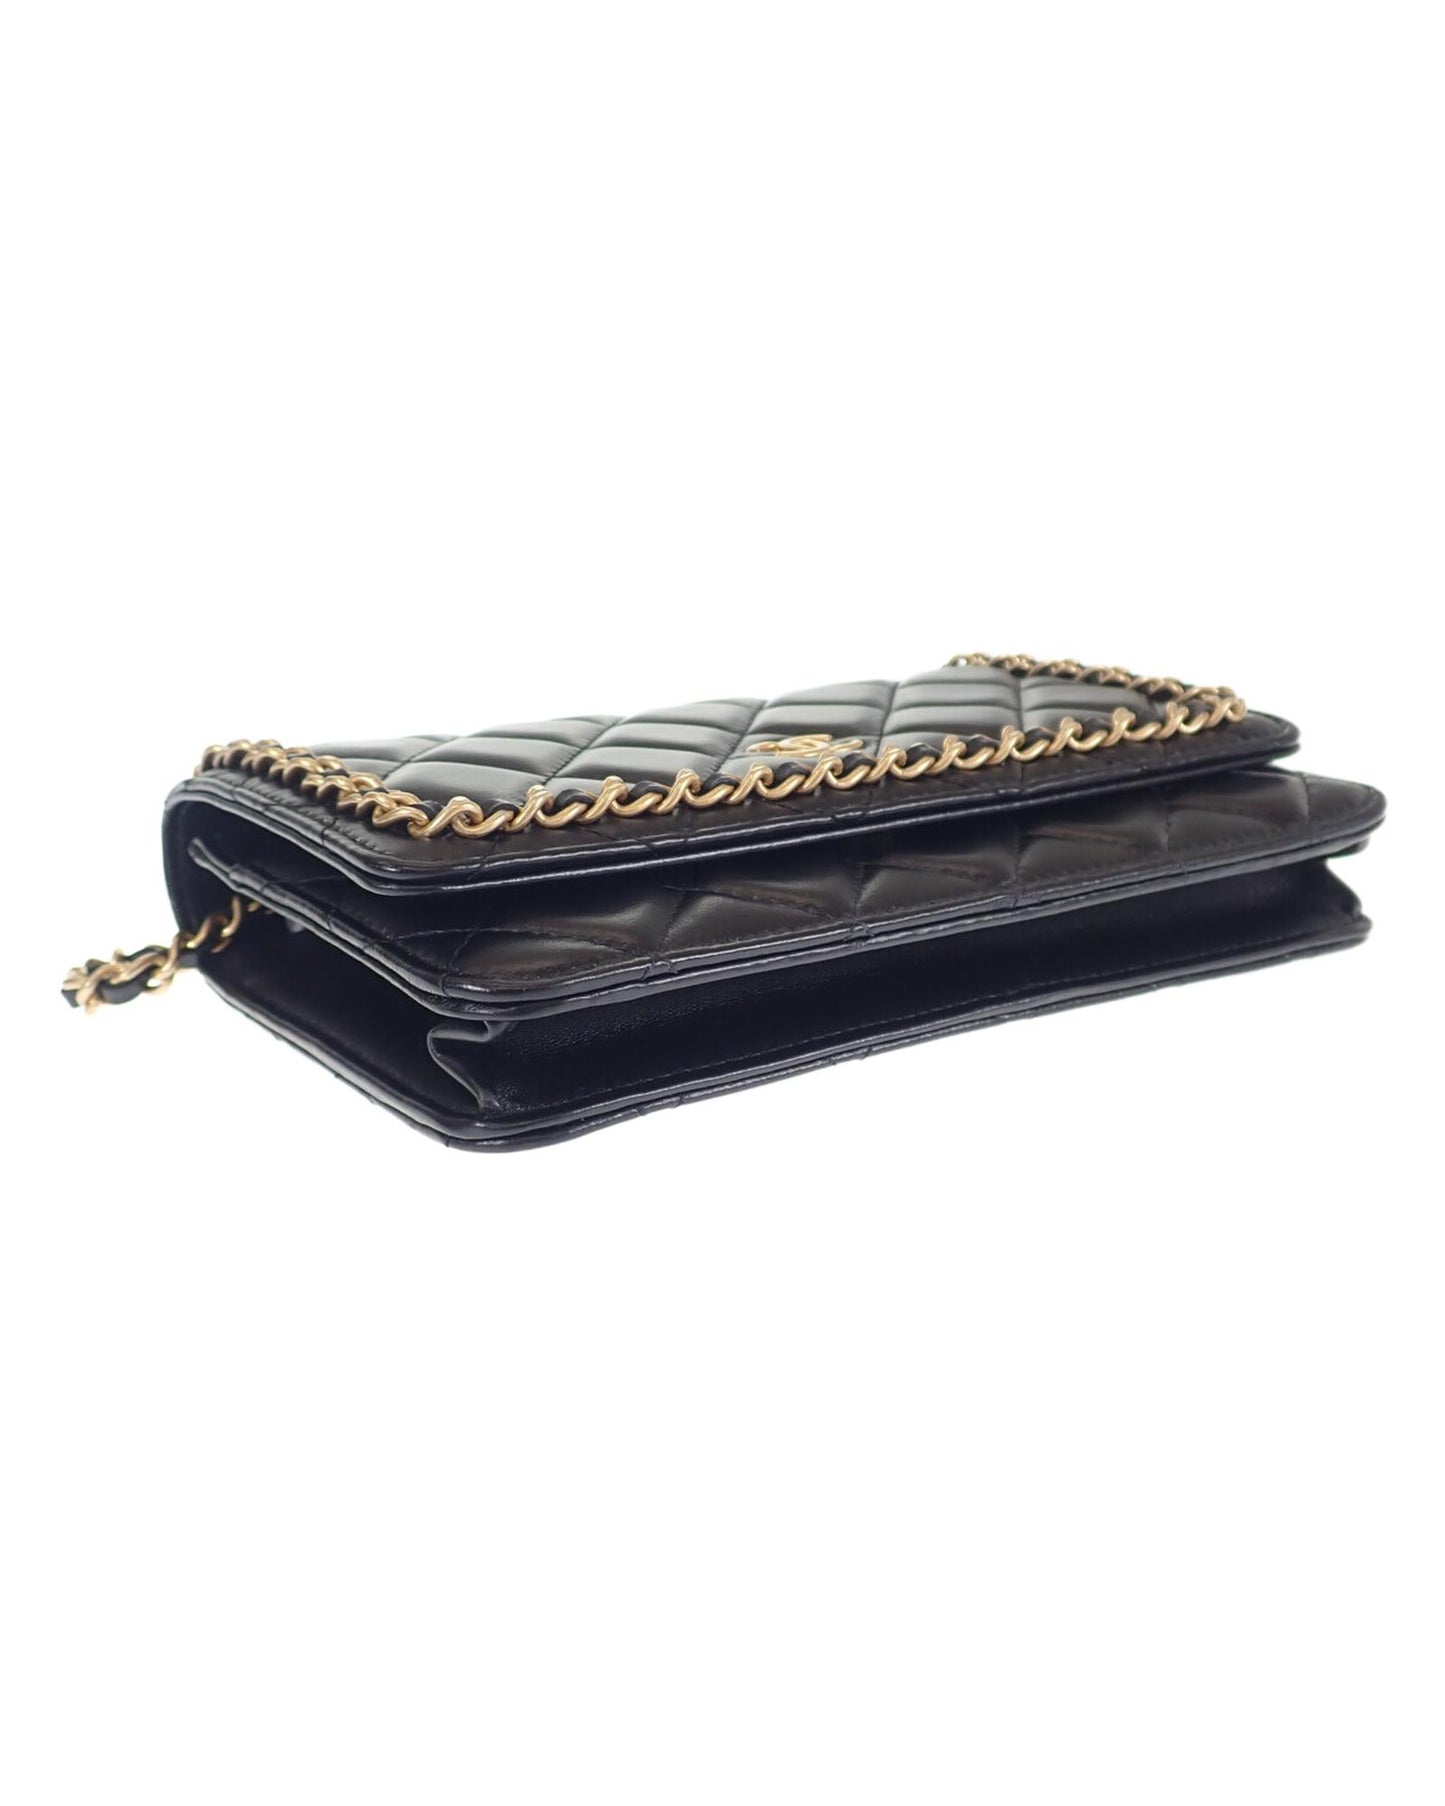 Chanel Women's Quilted Chain Wallet On Chain - Excellent Condition in Black